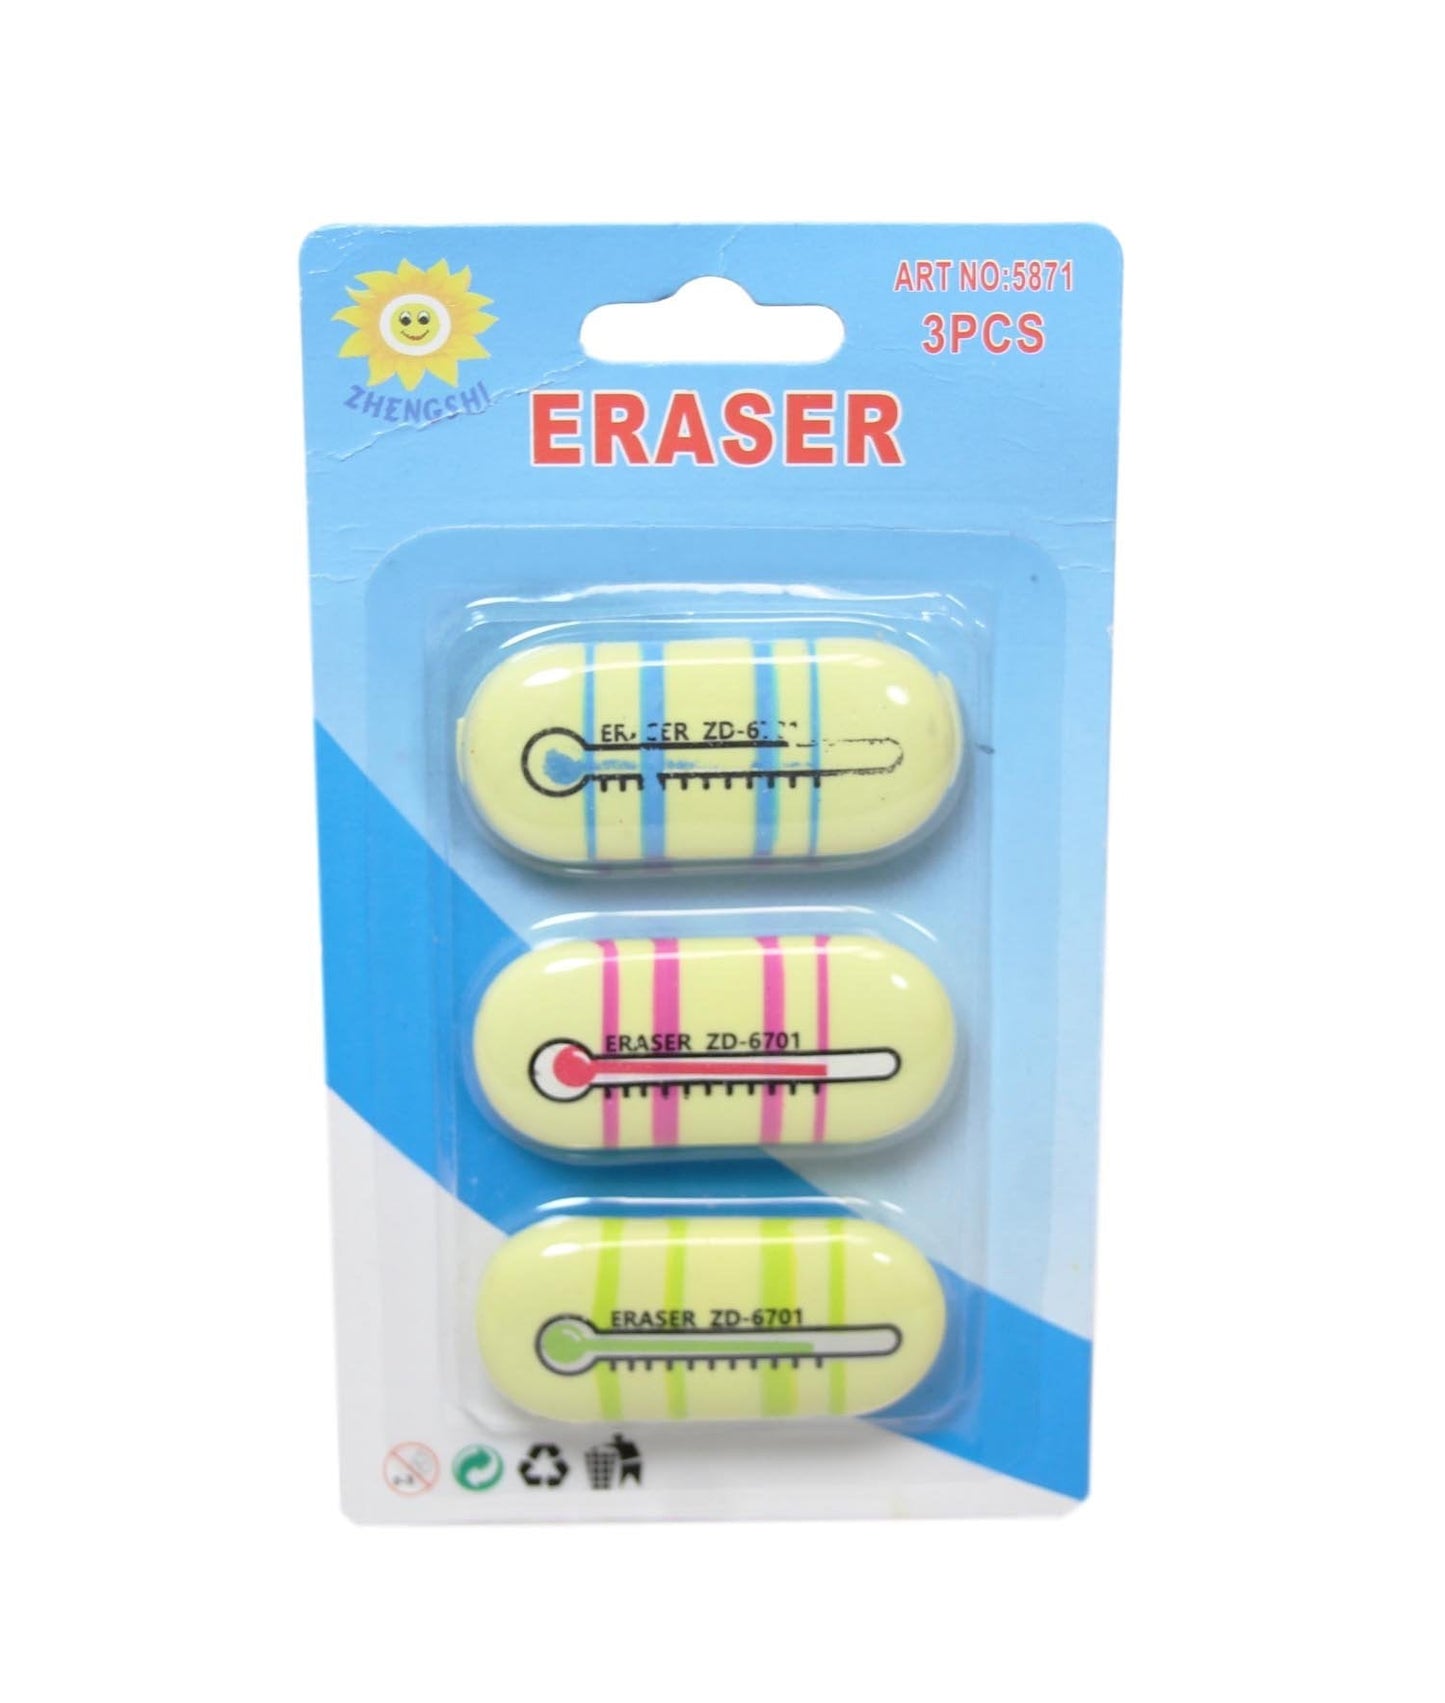 Stationary School Eraser Rubber Thermometer Themed 5 x 0.5 cm Pack of 3 Assorted Colours 5871 (Large Letter Rate)